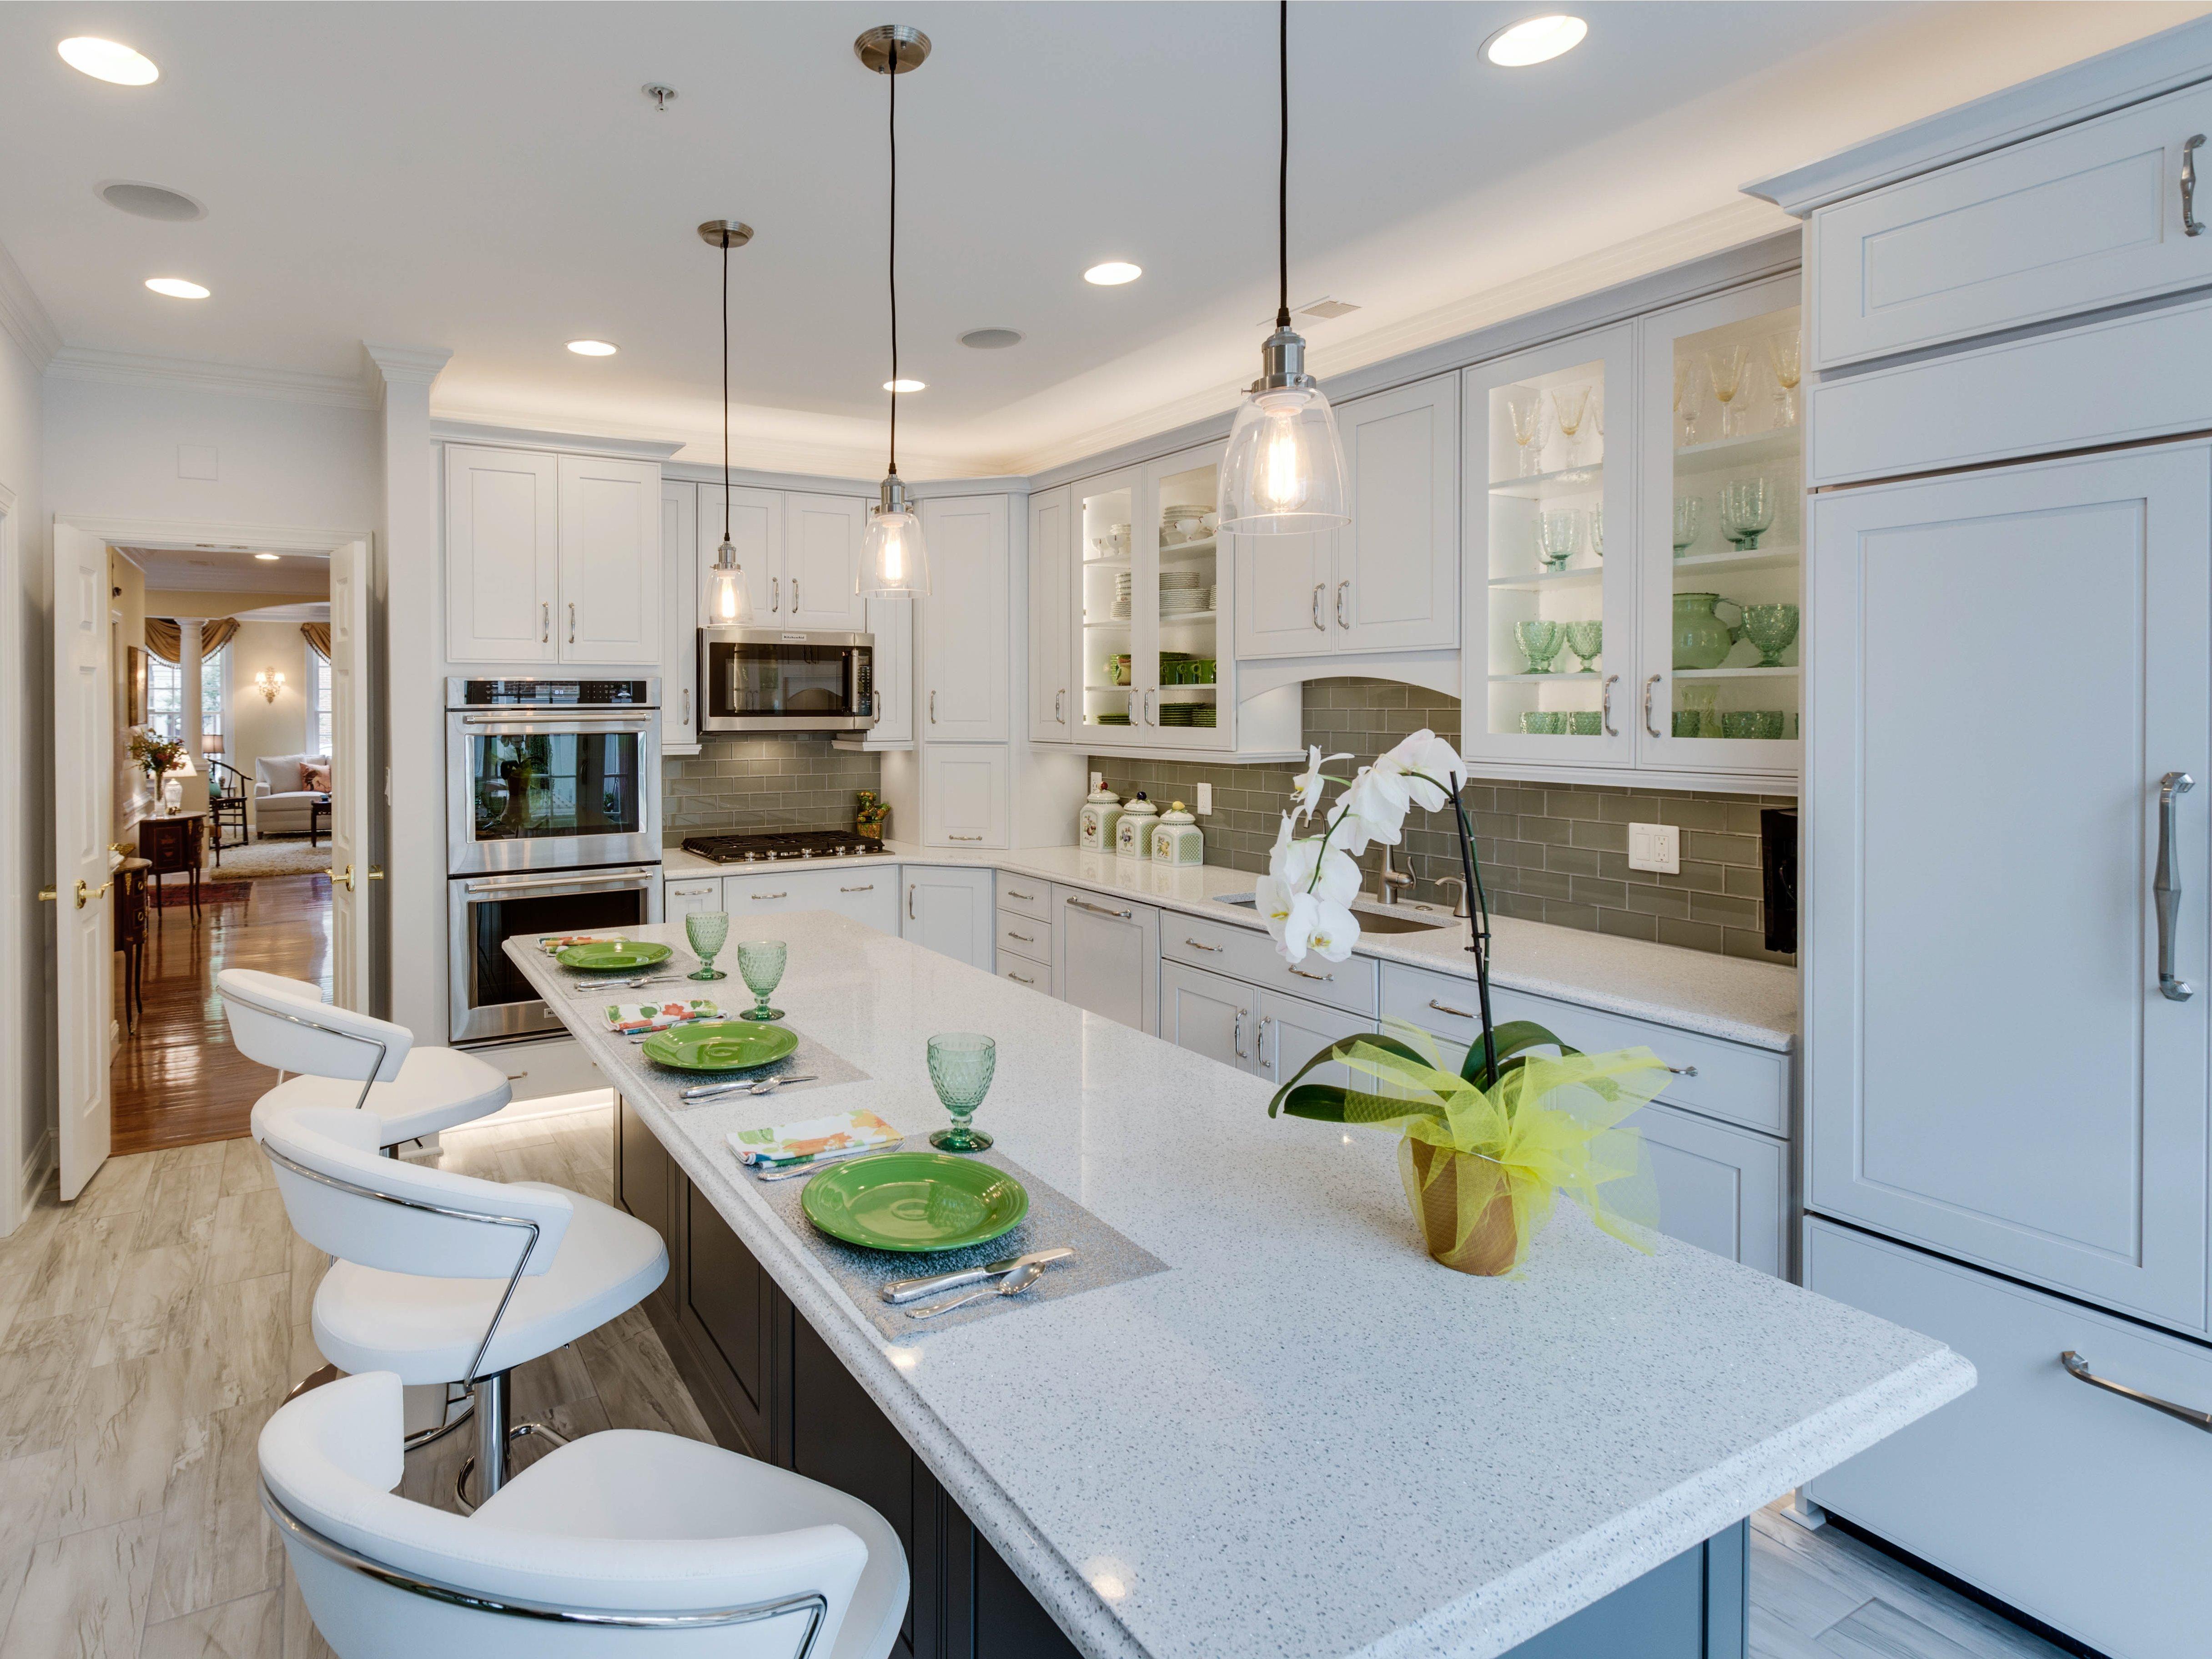 Crisp, bright and white kitchen cabinets light up this kitchen space.